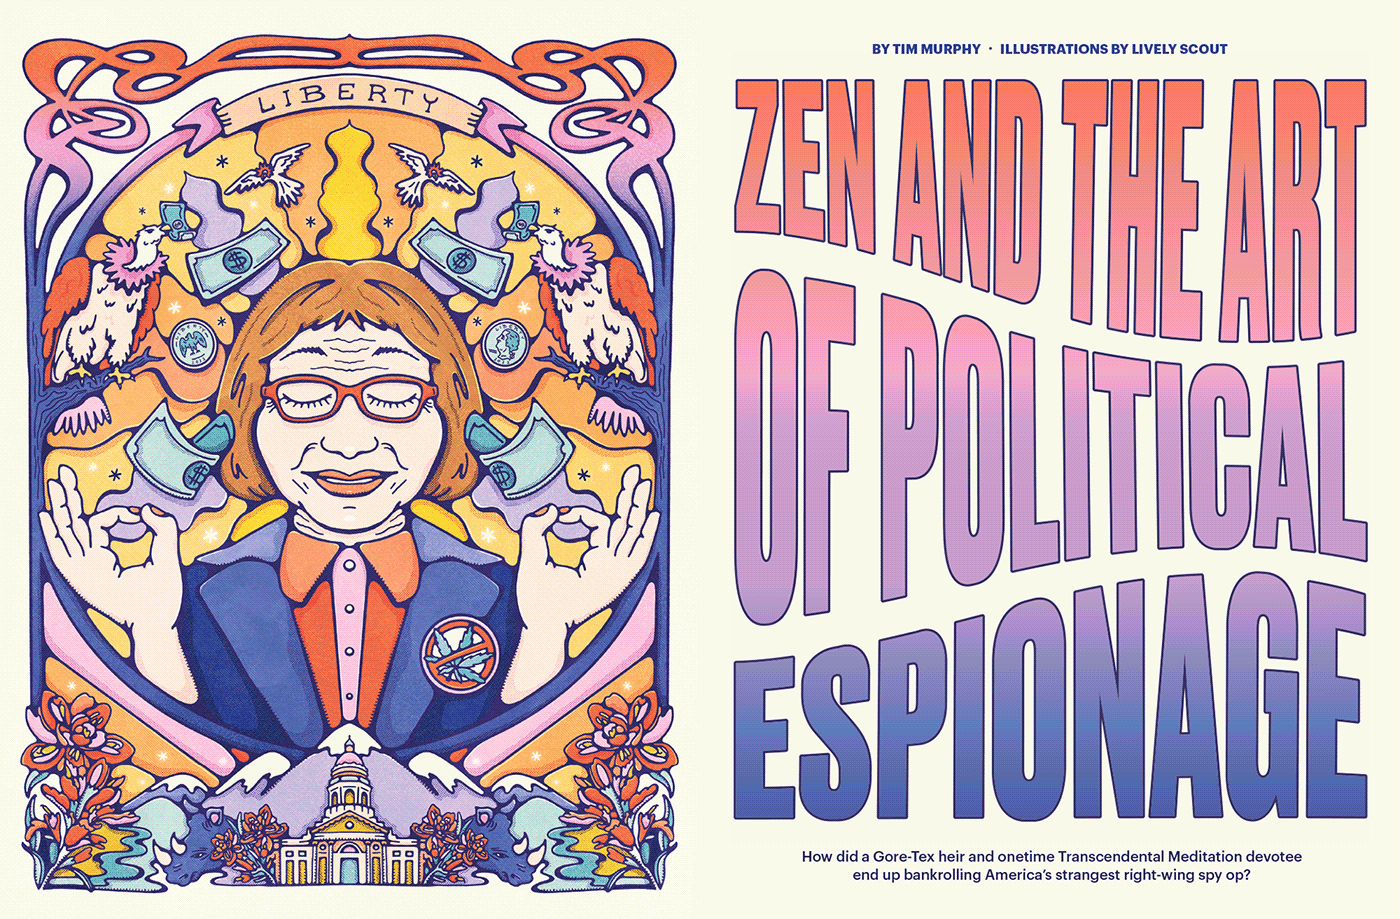 magazine spread of bright political portrait illustration and 'zen and the art of espionage' title